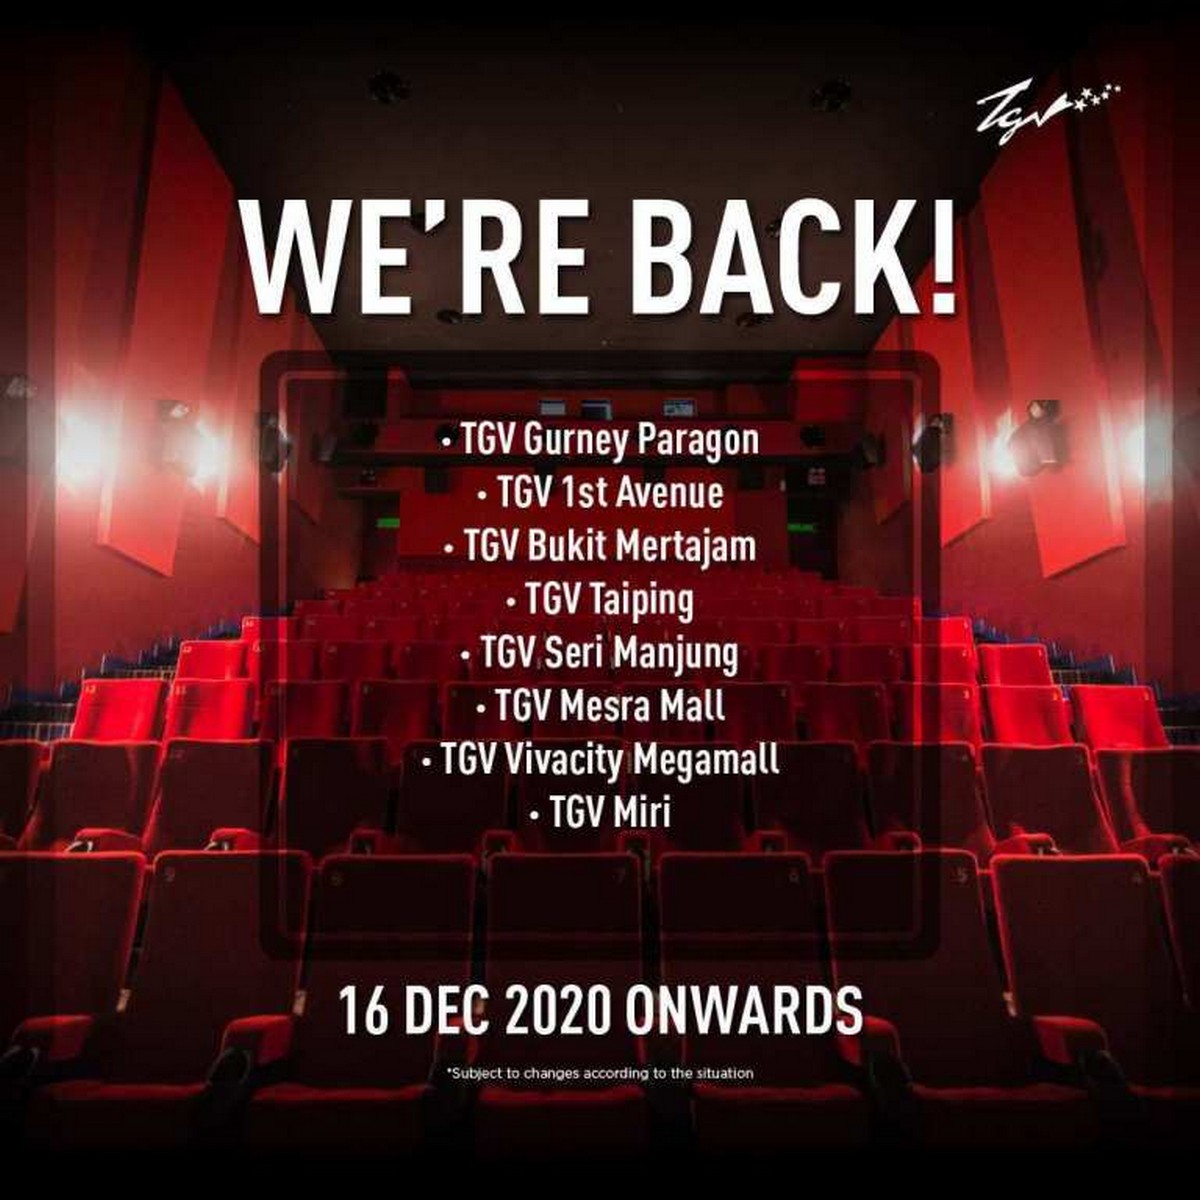 Gsc Tgv And Mbo Cinema Will Reopen On 16 Dec On Selected Branch Only Everydayonsales Com News